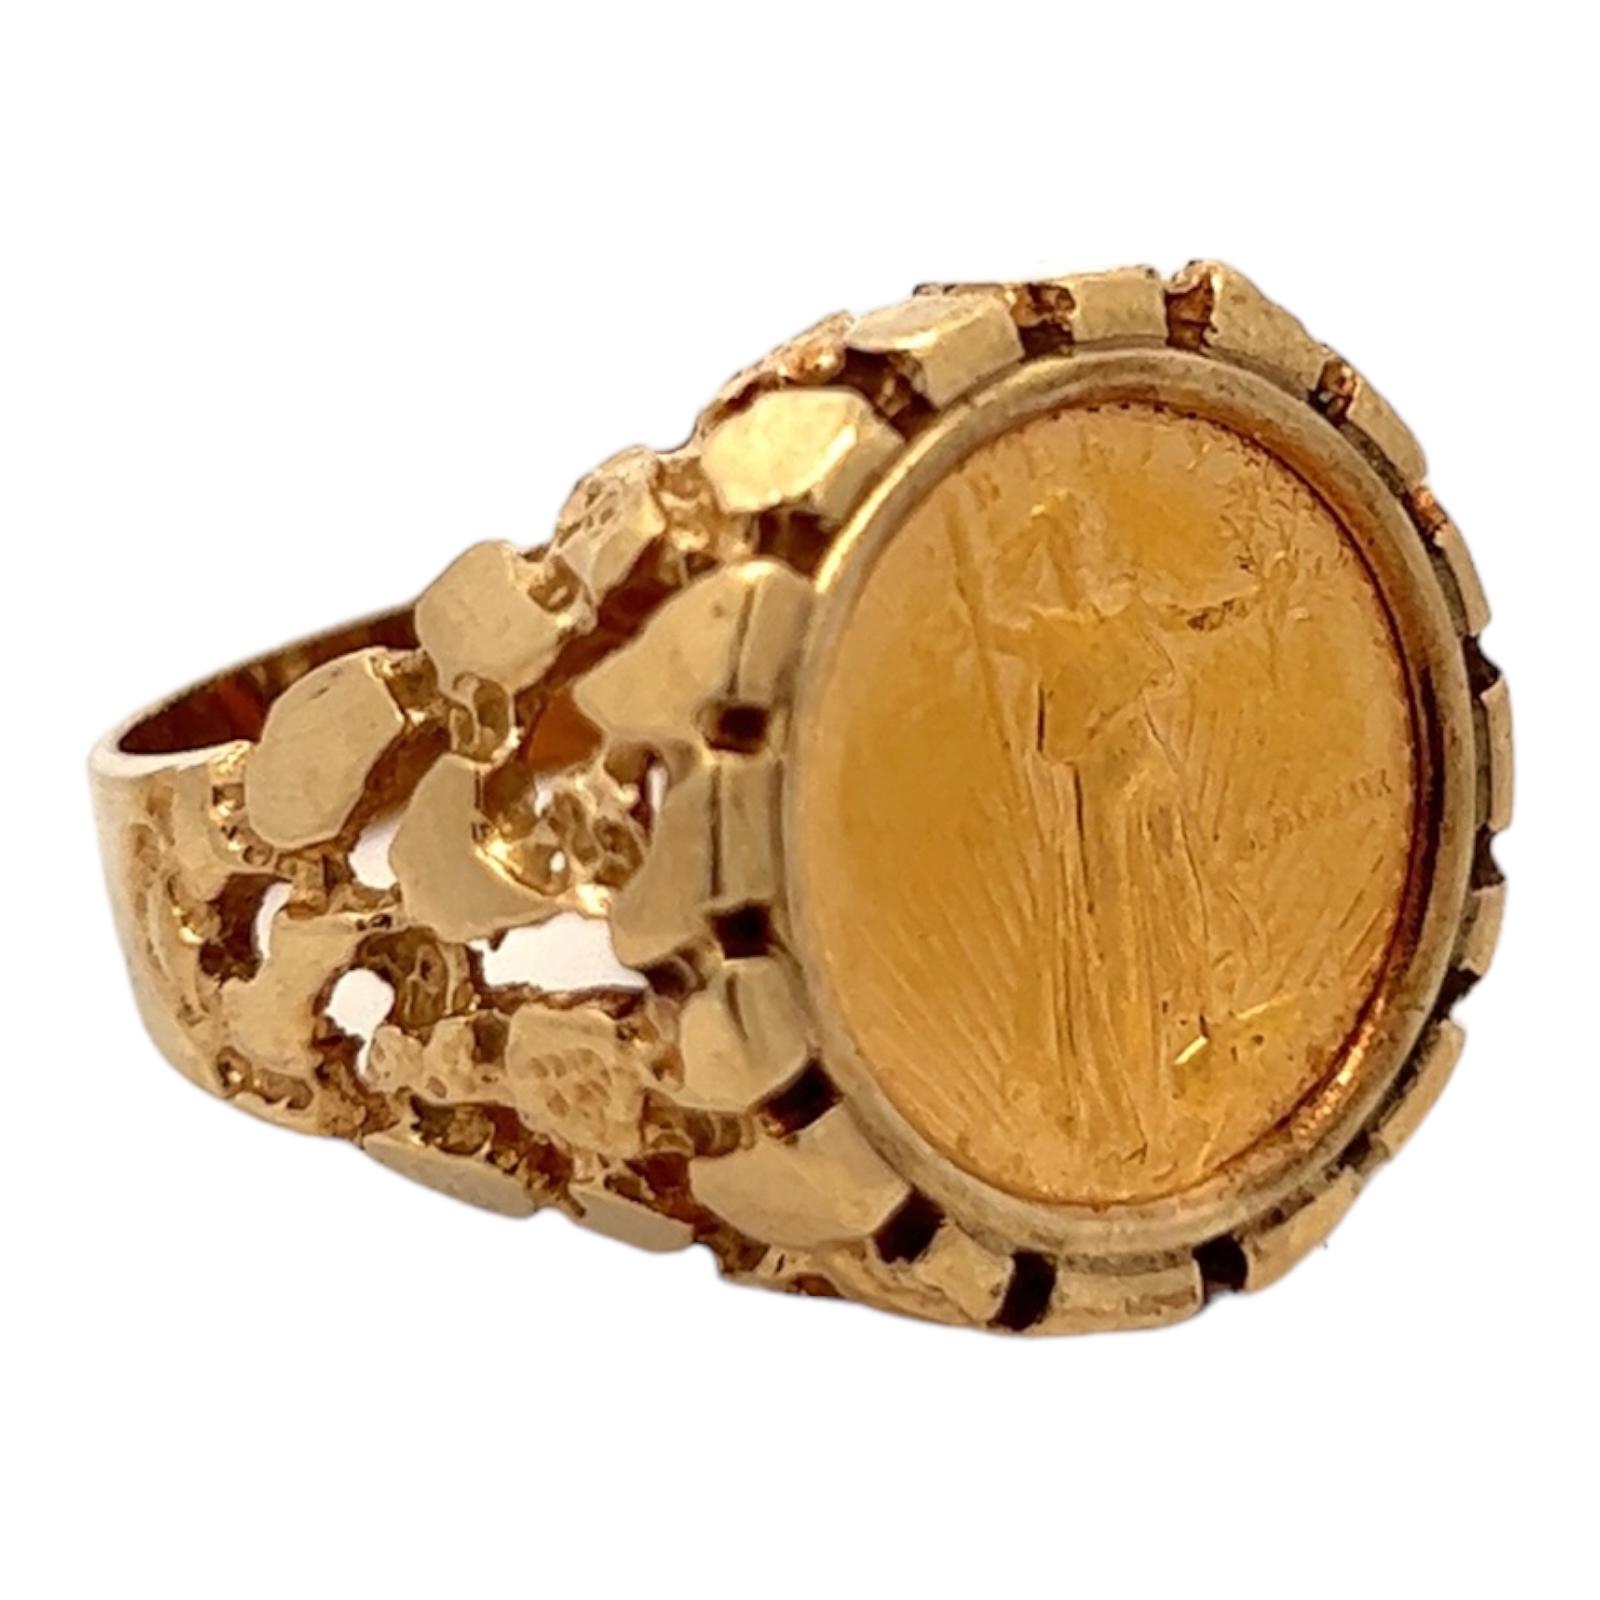 Gents nugget coin ring crafted in 14 karat yellow gold. The ring features a 1/10 oz US gold Liberty coin set in a gold nugget ring. The ring is currently size 11 (can be sized), and graduates from 5-20mm in width. 